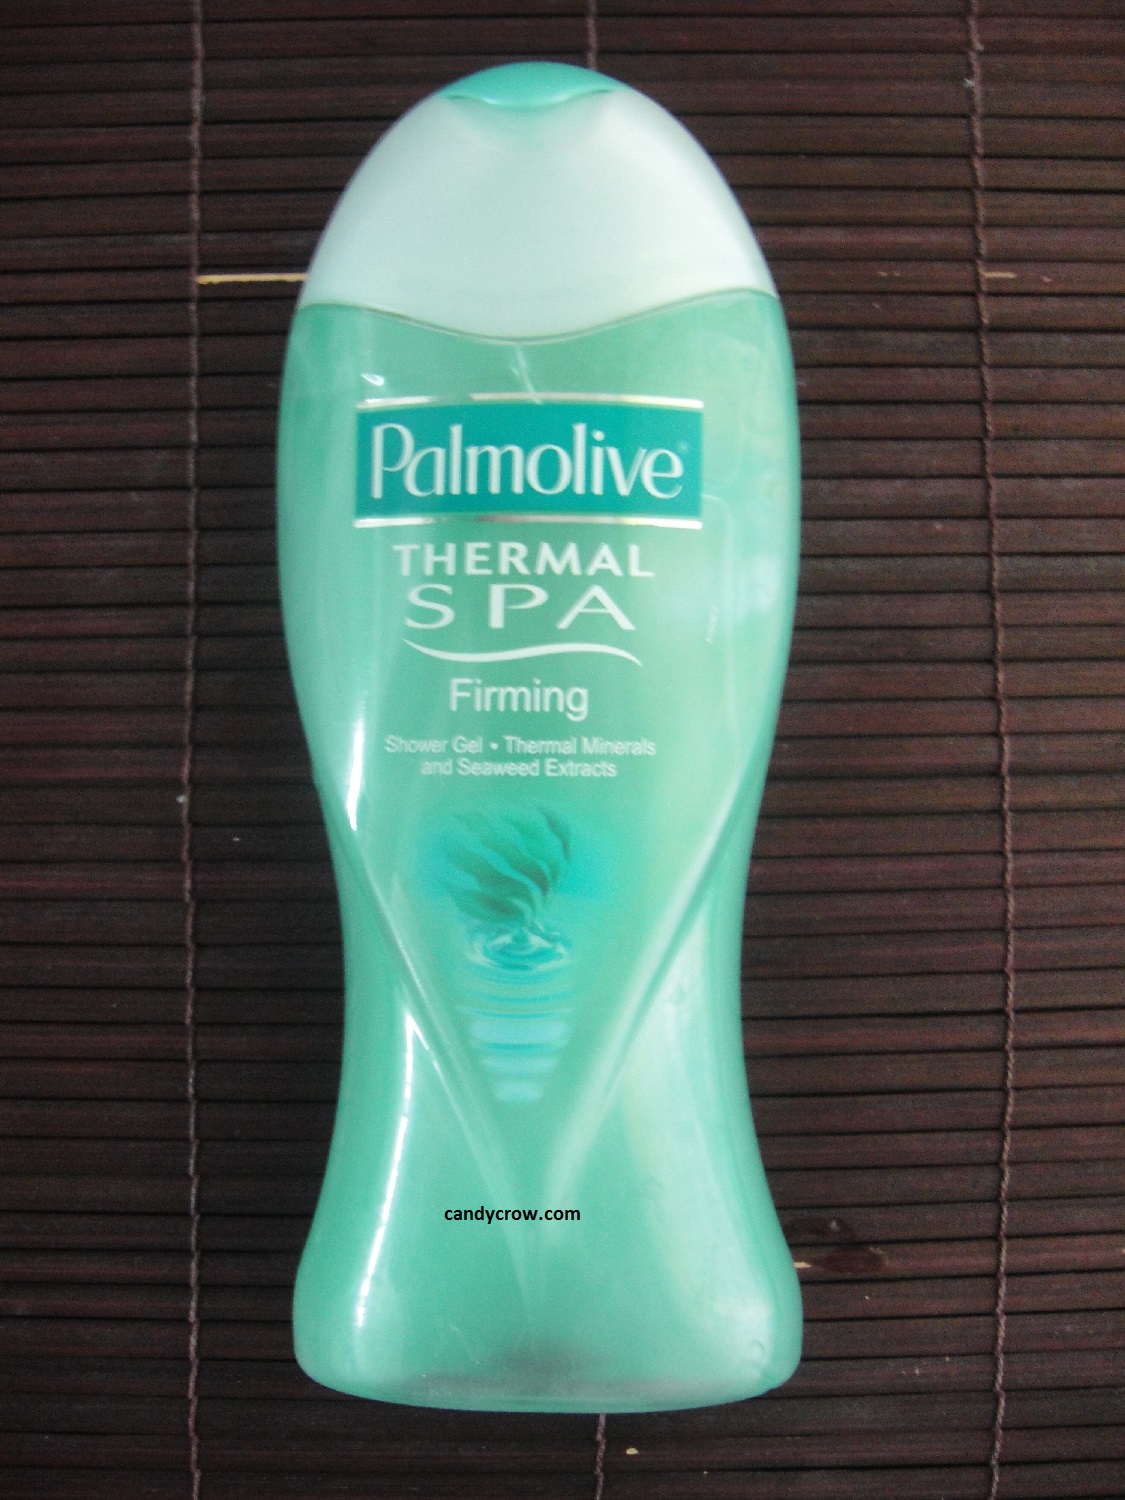 Palmolive Thermal Spa Firming Shower Gel Review